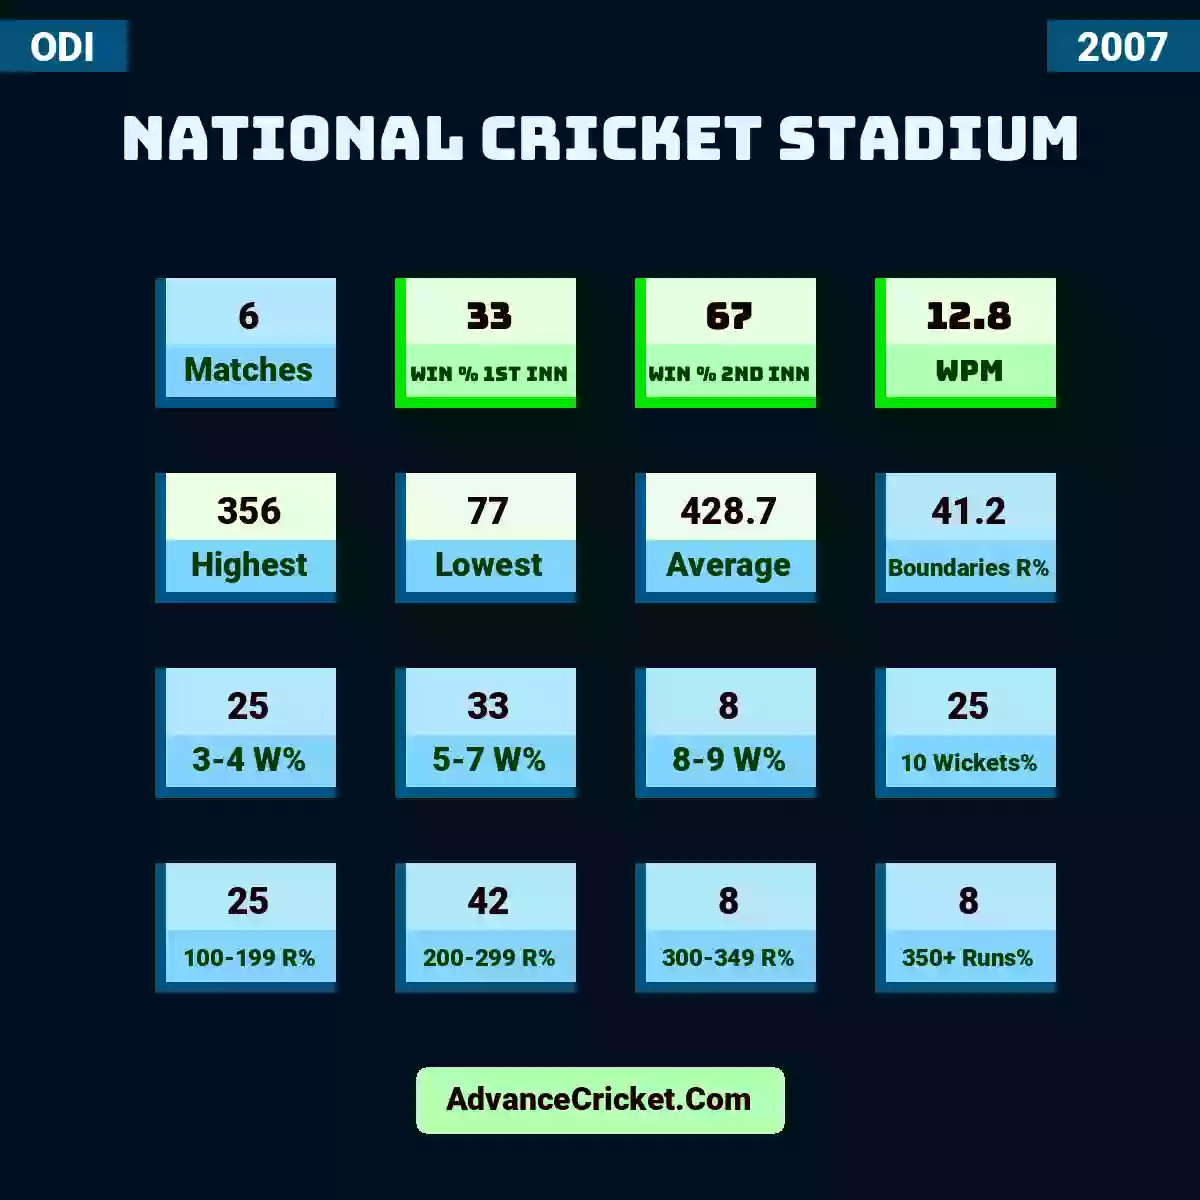 Image showing National Cricket Stadium with Matches: 6, Win % 1st Inn: 33, Win % 2nd Inn: 67, WPM: 12.8, Highest: 356, Lowest: 77, Average: 428.7, Boundaries R%: 41.2, 3-4 W%: 25, 5-7 W%: 33, 8-9 W%: 8, 10 Wickets%: 25, 100-199 R%: 25, 200-299 R%: 42, 300-349 R%: 8, 350+ Runs%: 8.